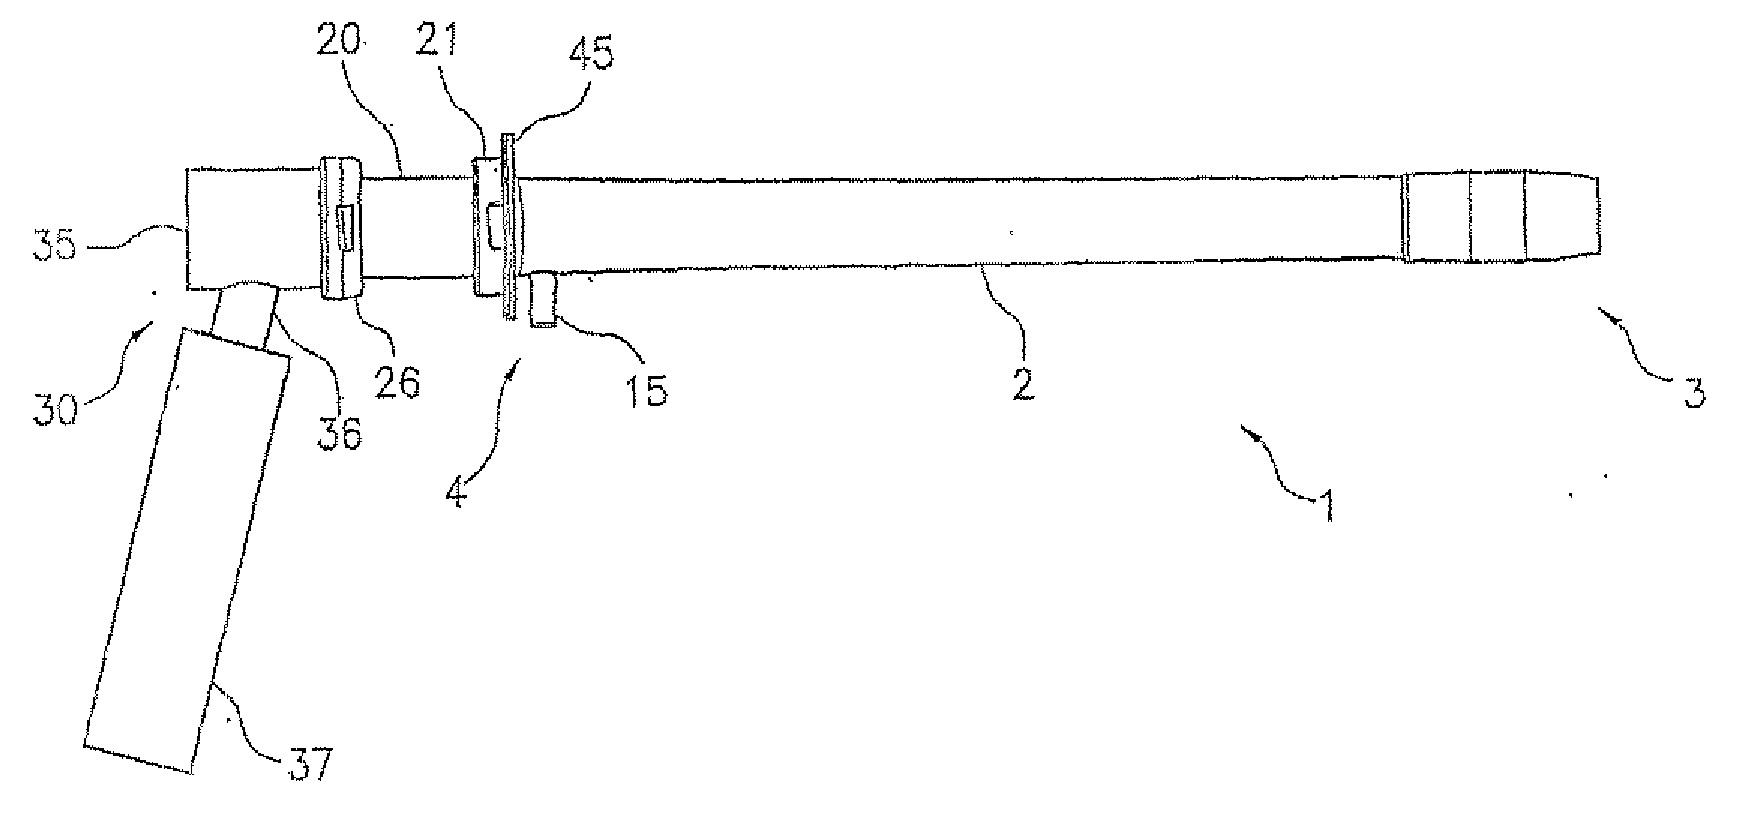 Sigmoidoscope with optical coupling element